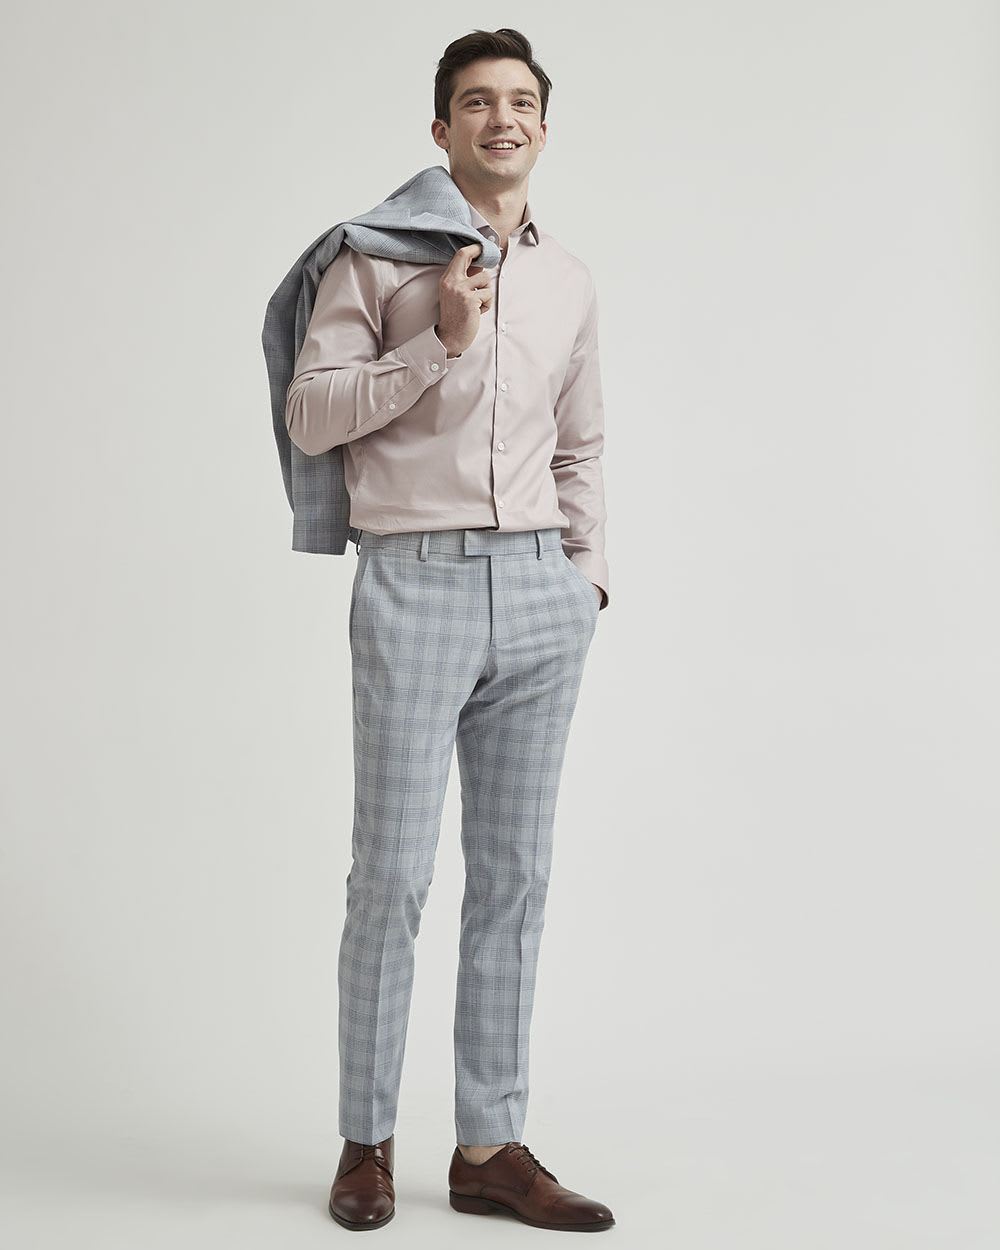 Slim Fit Checkered Grey Suit Pant | RW&CO.